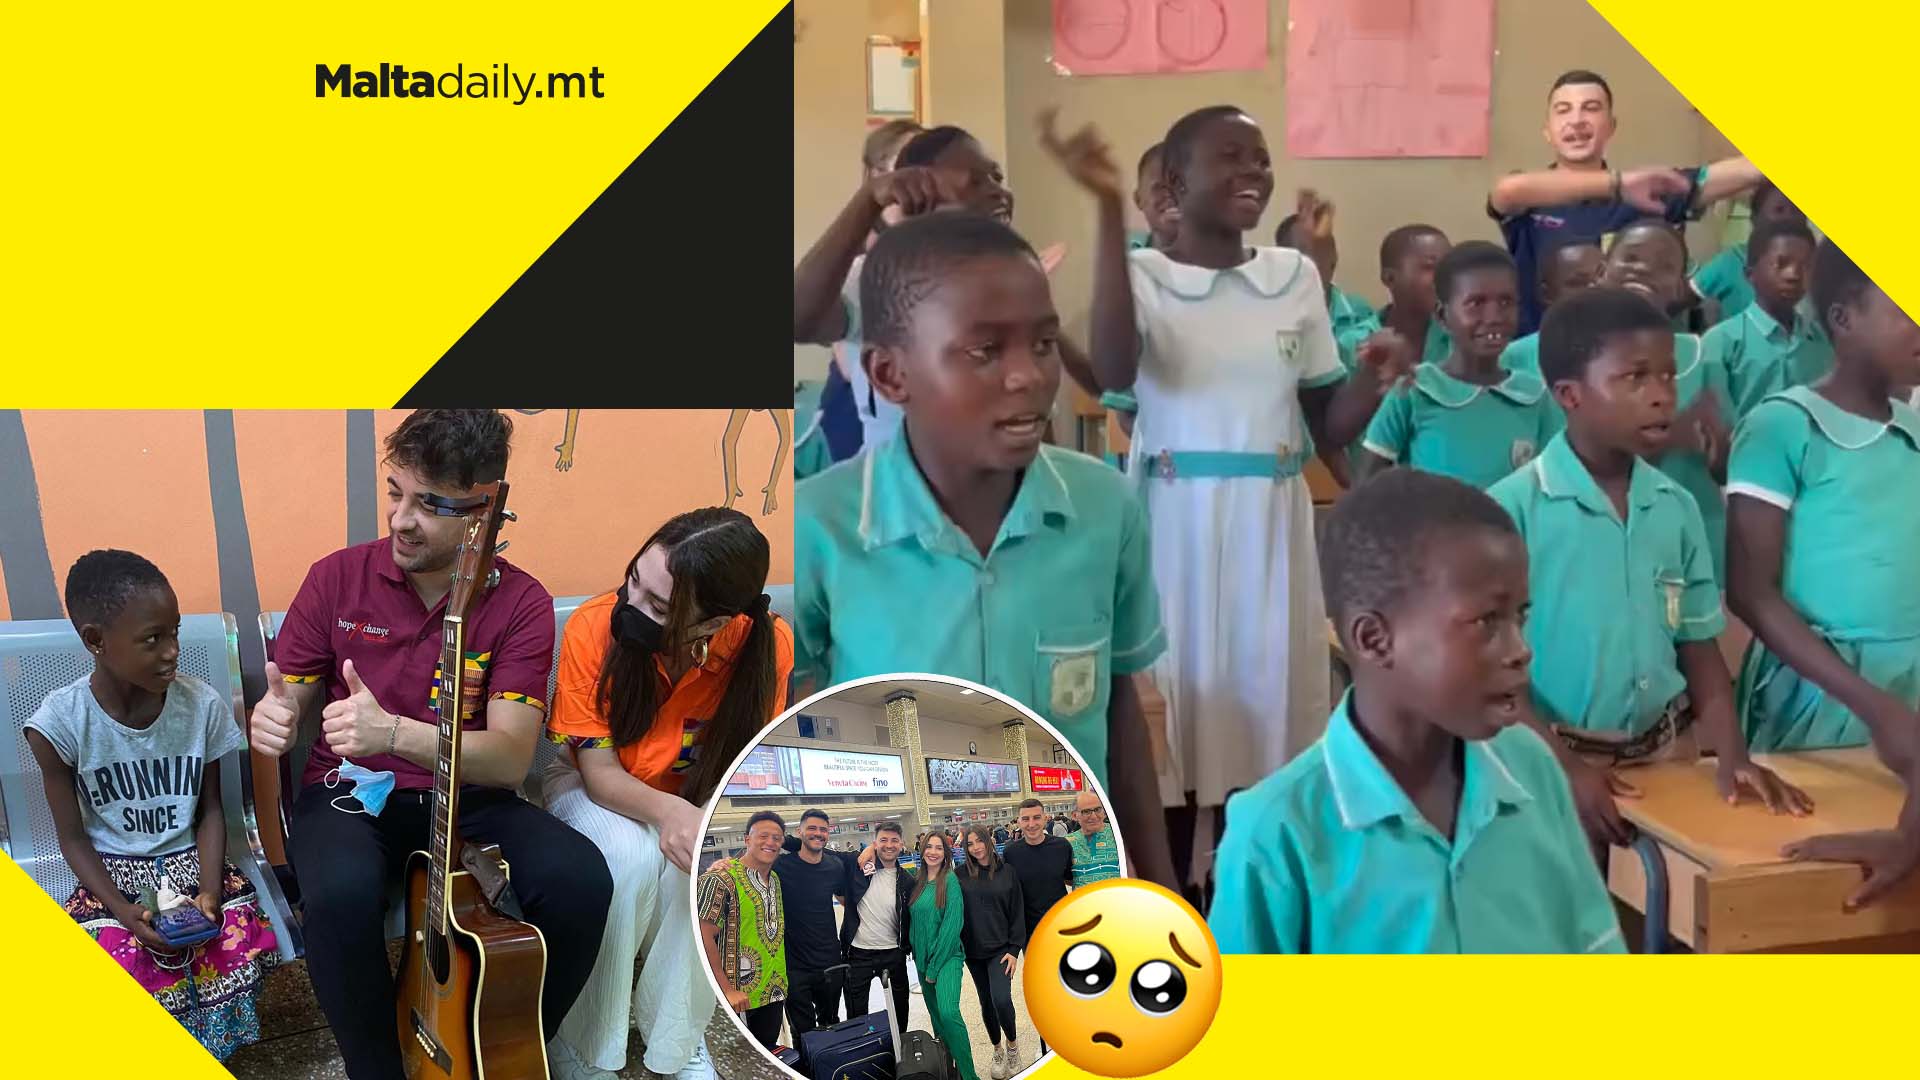 Ghanaian students sing ‘Xemx’ with Maltese influencers on missionary work